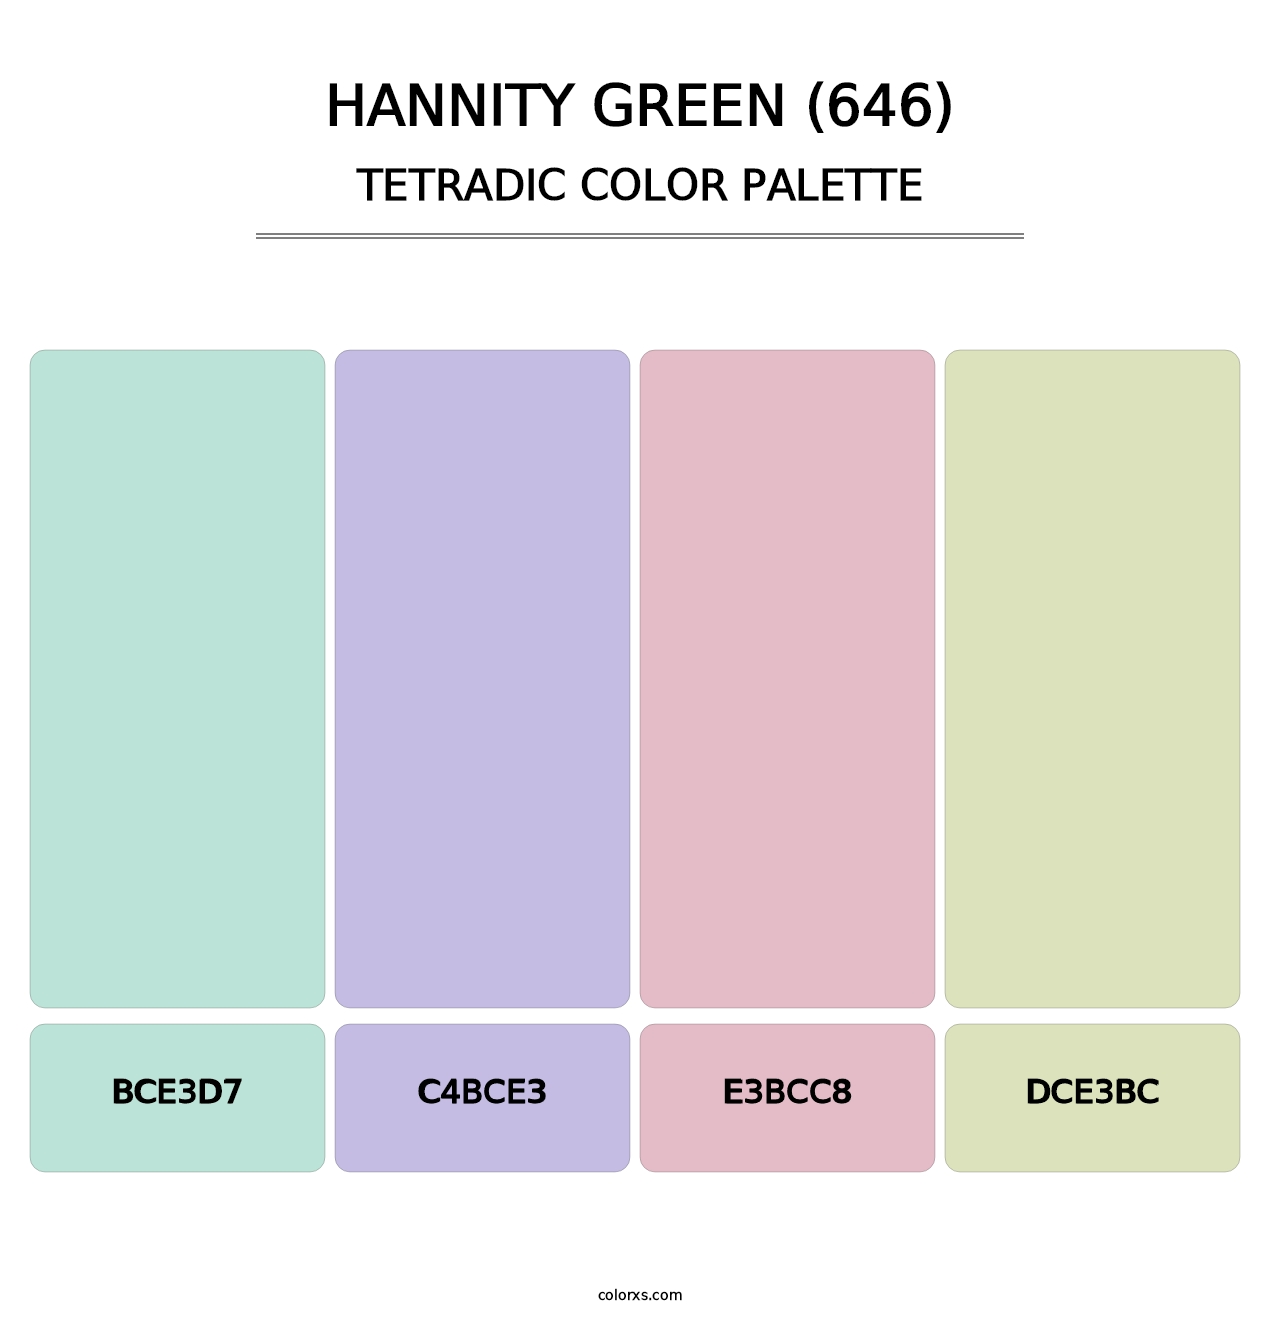 Hannity Green (646) - Tetradic Color Palette